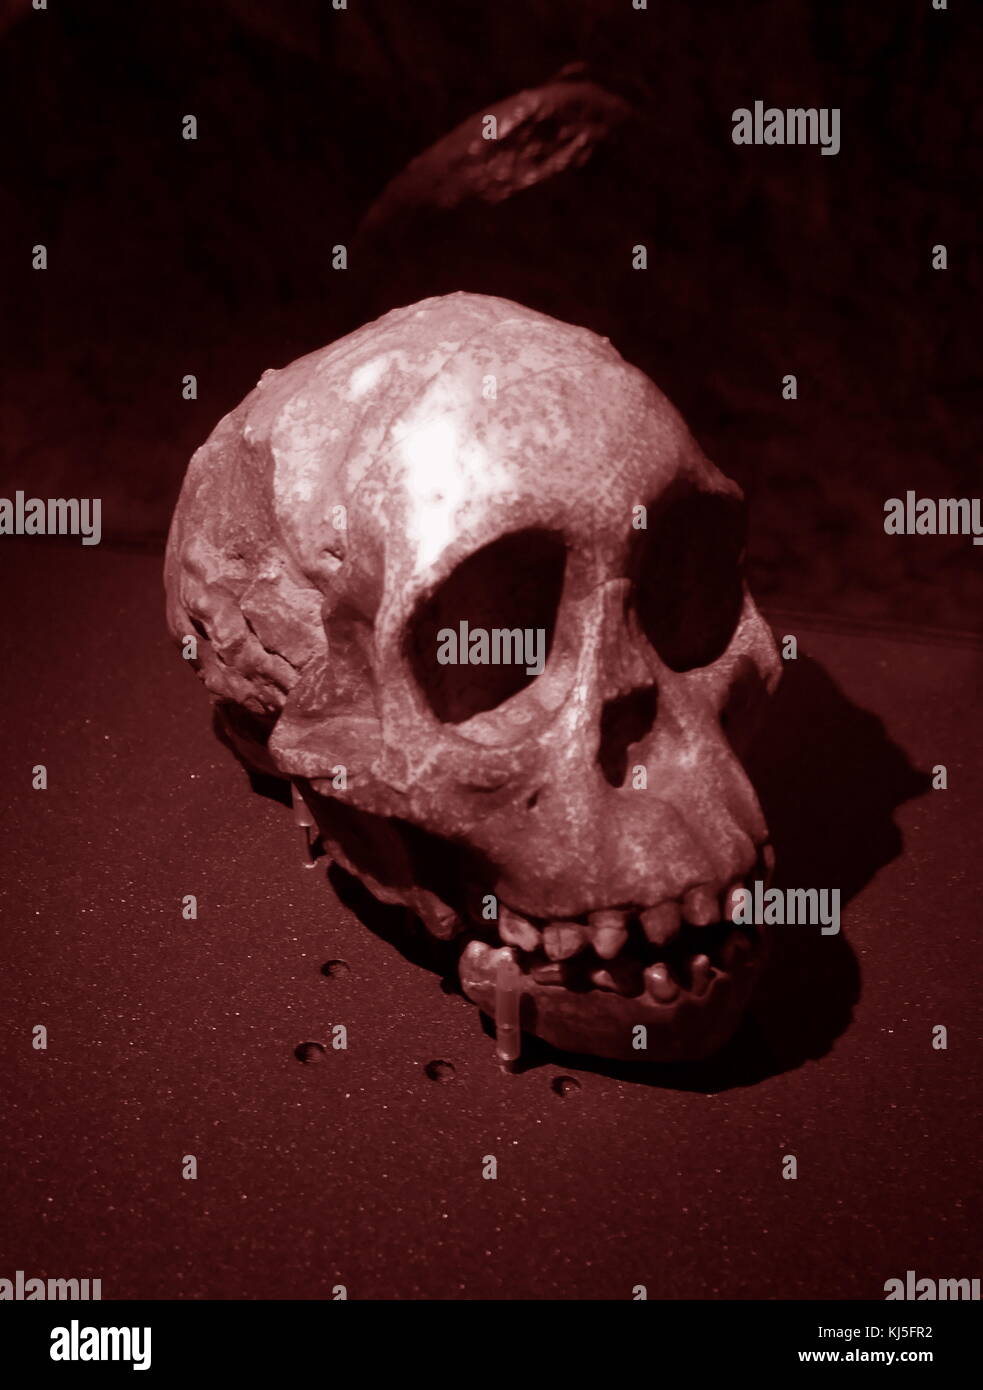 Skull of an early homo sapiens found in Eastern Europe. Stock Photo